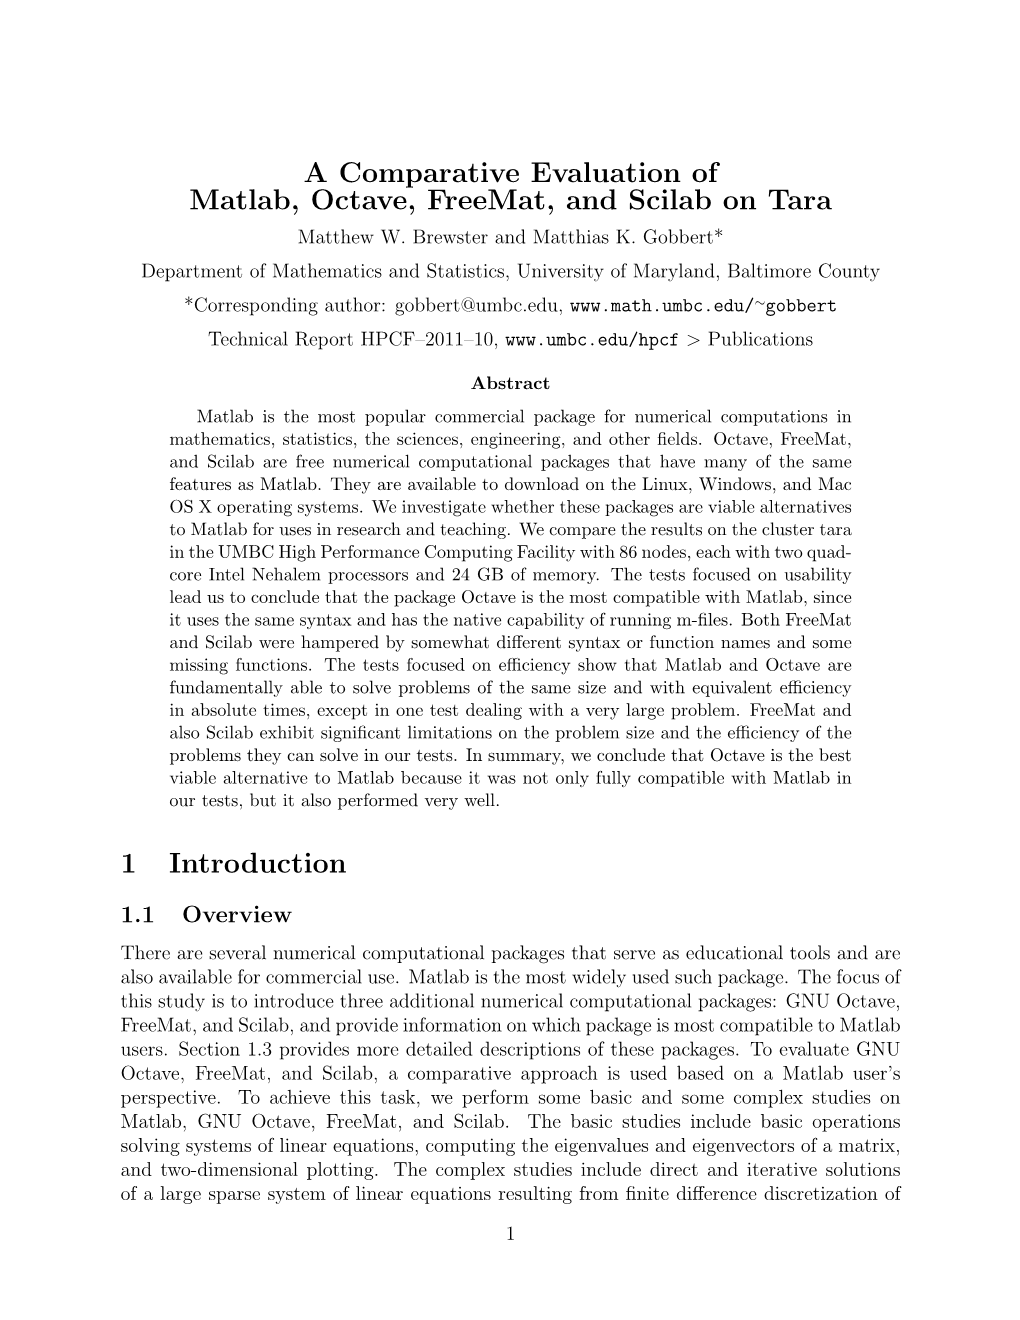 A Comparative Evaluation of Matlab, Octave, Freemat, and Scilab on Tara Matthew W